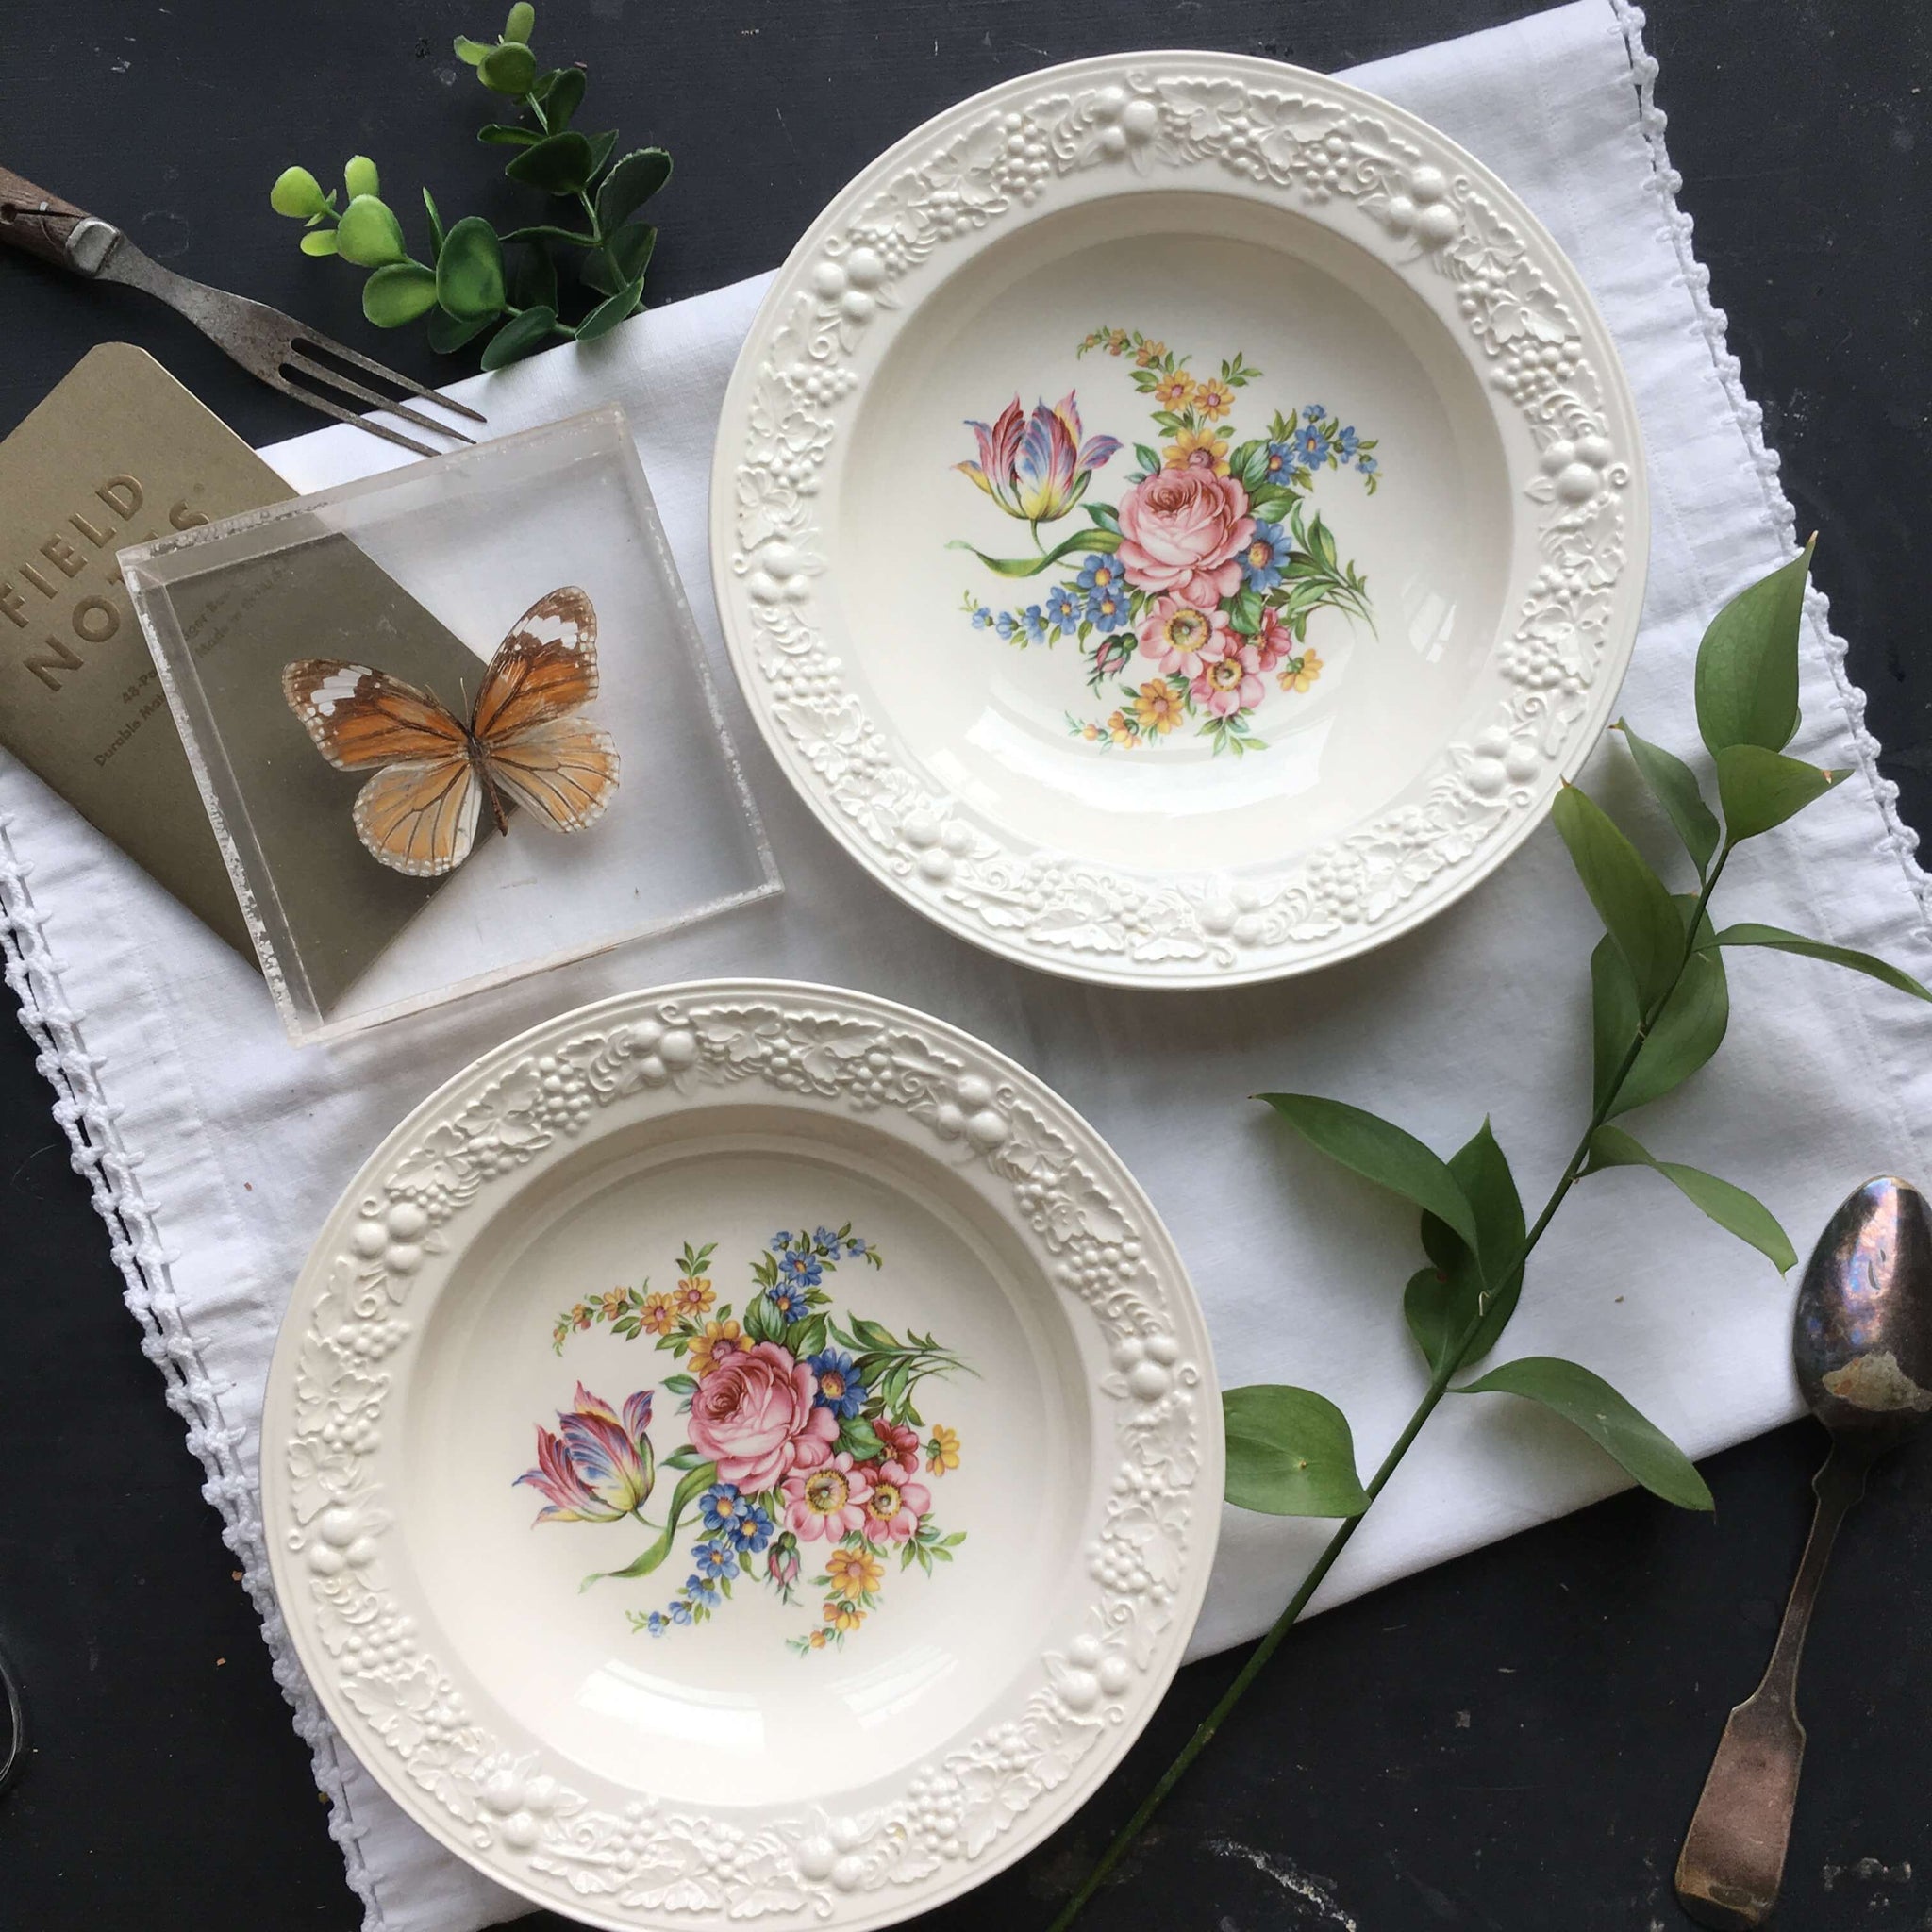 Vintage 1930's Homer Laughlin Theme Eggshell Bowls - Set of Two - Floral Bouquet with Raised Grapevine Rims